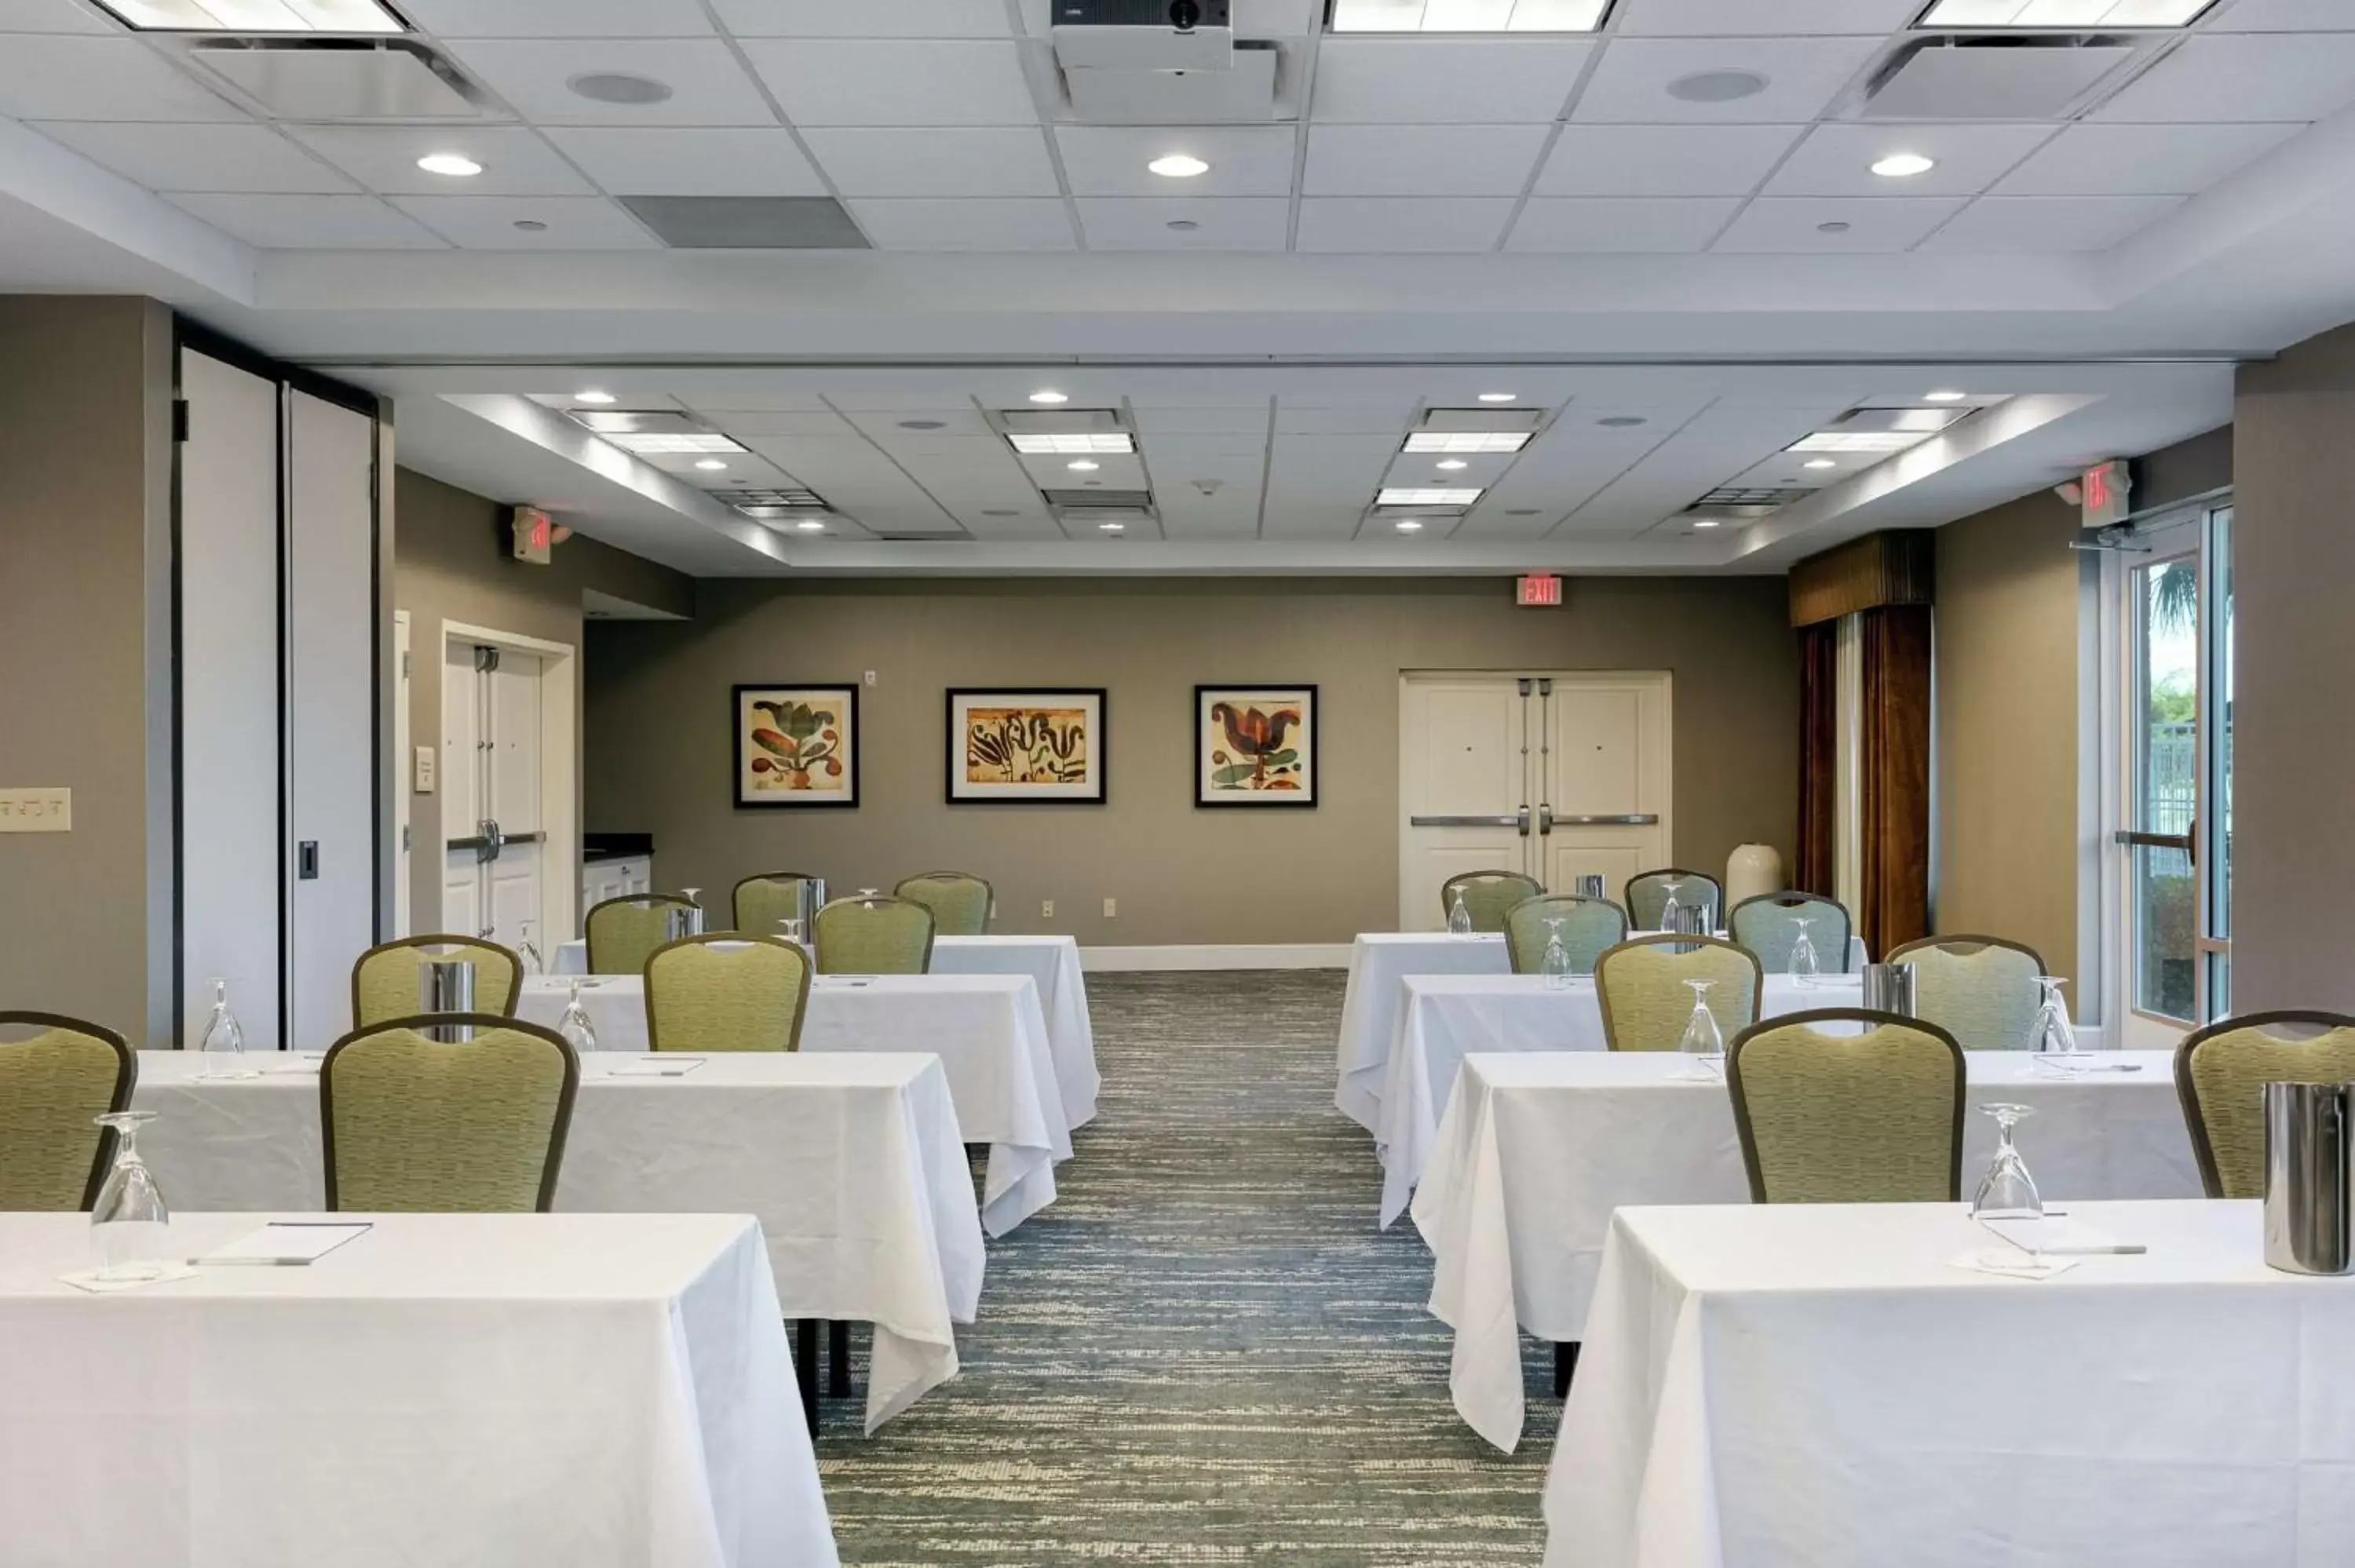 Meeting/conference room, Banquet Facilities in Hilton Garden Inn Mobile West I-65 Airport Boulevard